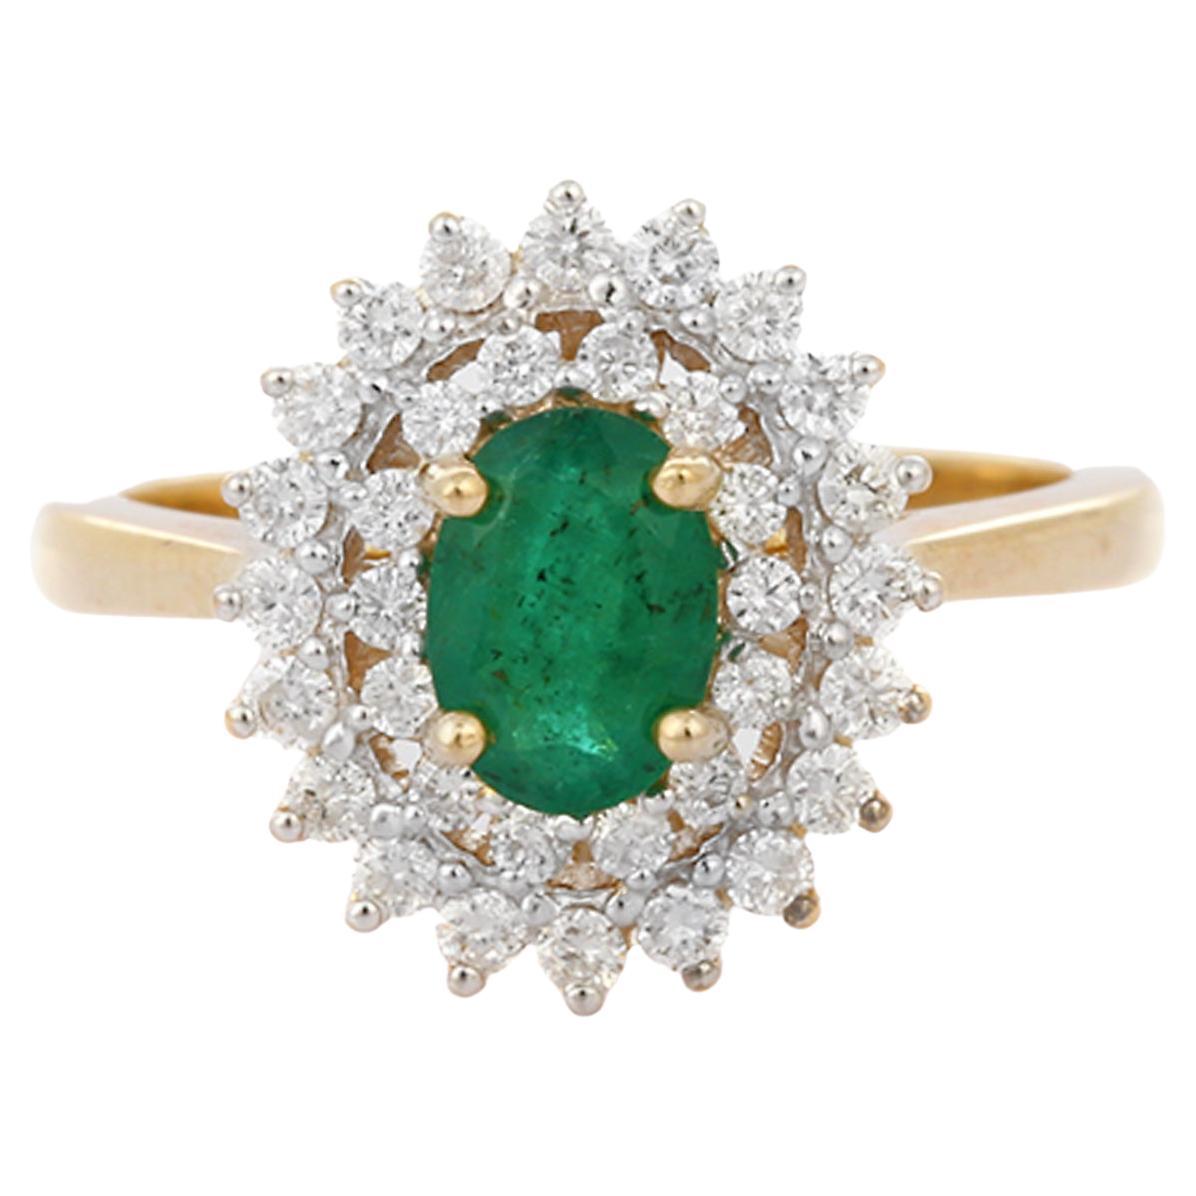 14K Yellow Gold Designer Oval Cut Emerald Ring Mounted with Layers of Diamonds